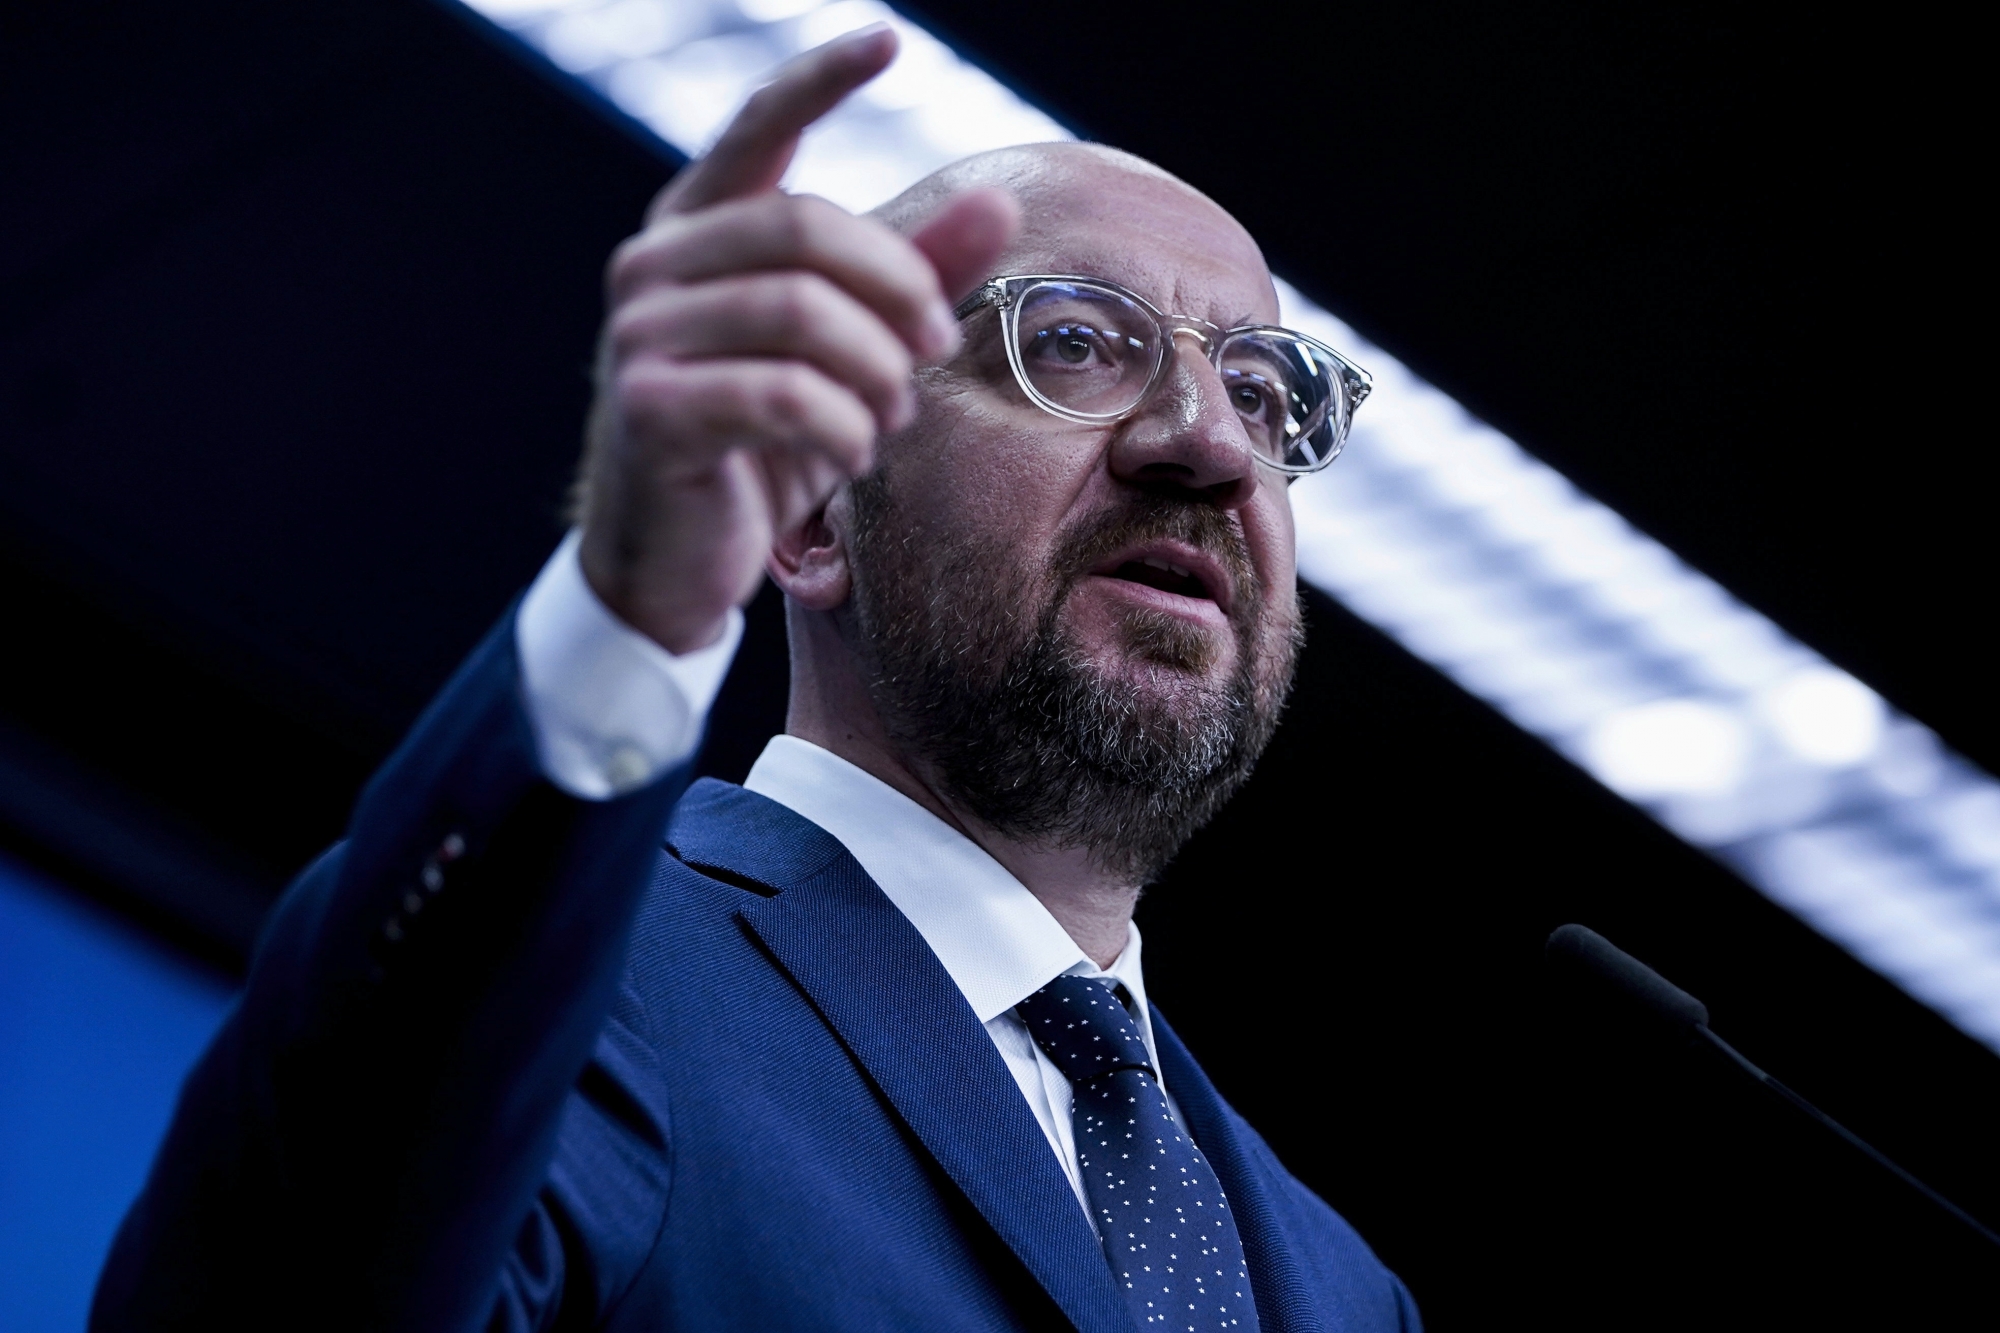 European Council President Charles Michel speaks during a media conference at the European Council building in Brussels, Friday, July 10, 2020. European Council President Charles Michel presented updated proposals for the EU's long-term budget and post-coronavirus recovery plan ahead of a summit next week in Brussels where heads of state and government leaders will try to agree on a compromise. (Kenzo Tribouillard, Pool Photo via AP) ArcInfo